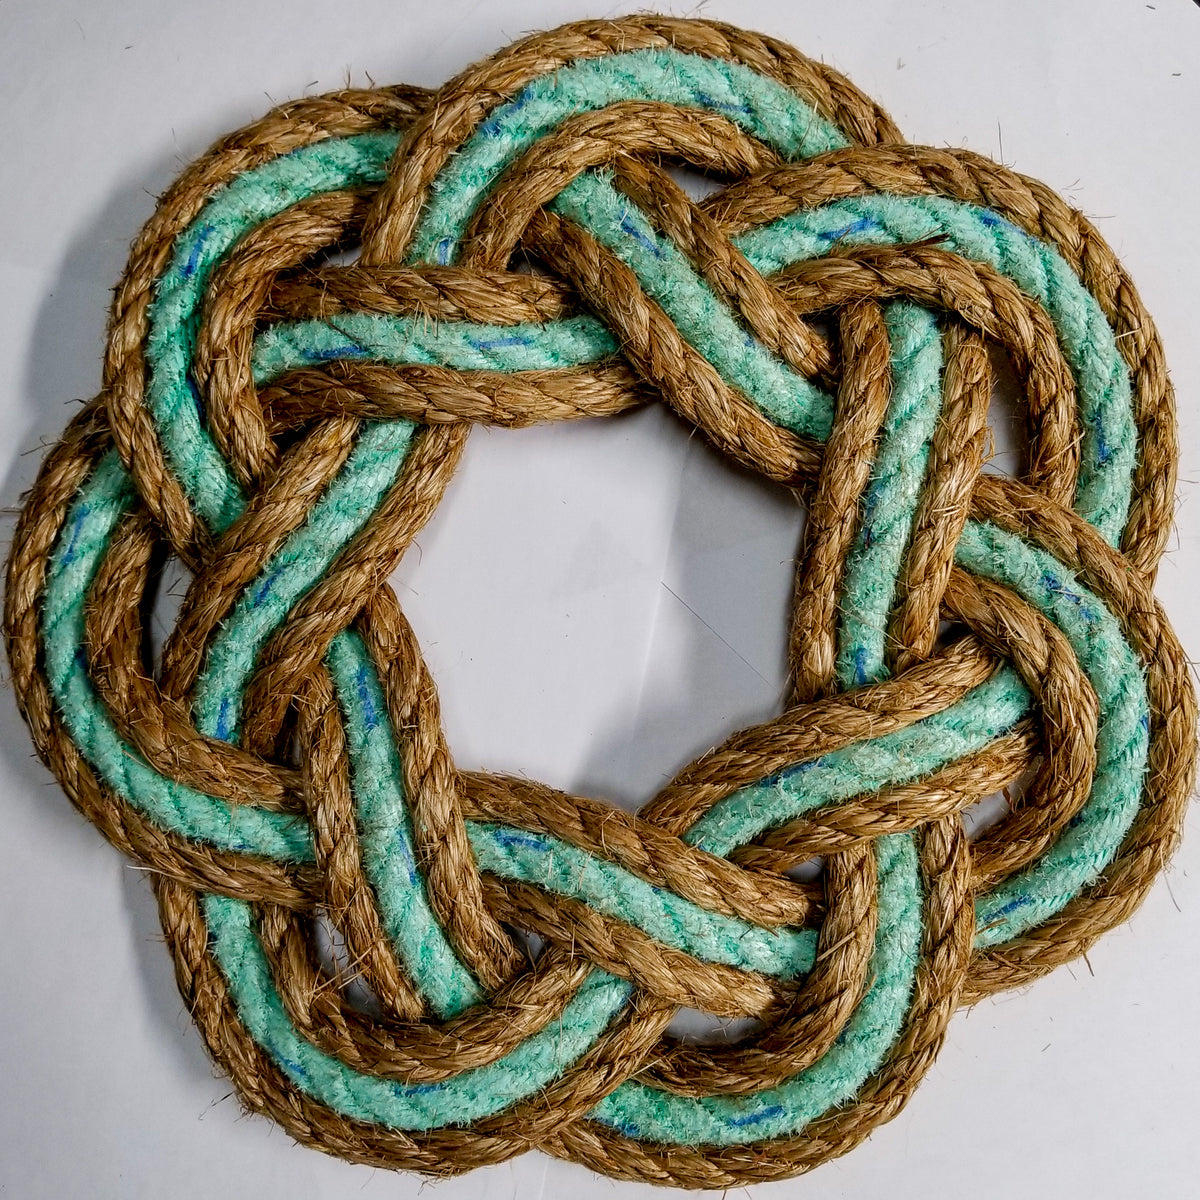 Cast Away Swirl Sailors Wreath – All For Knot Rope Weaving Inc.